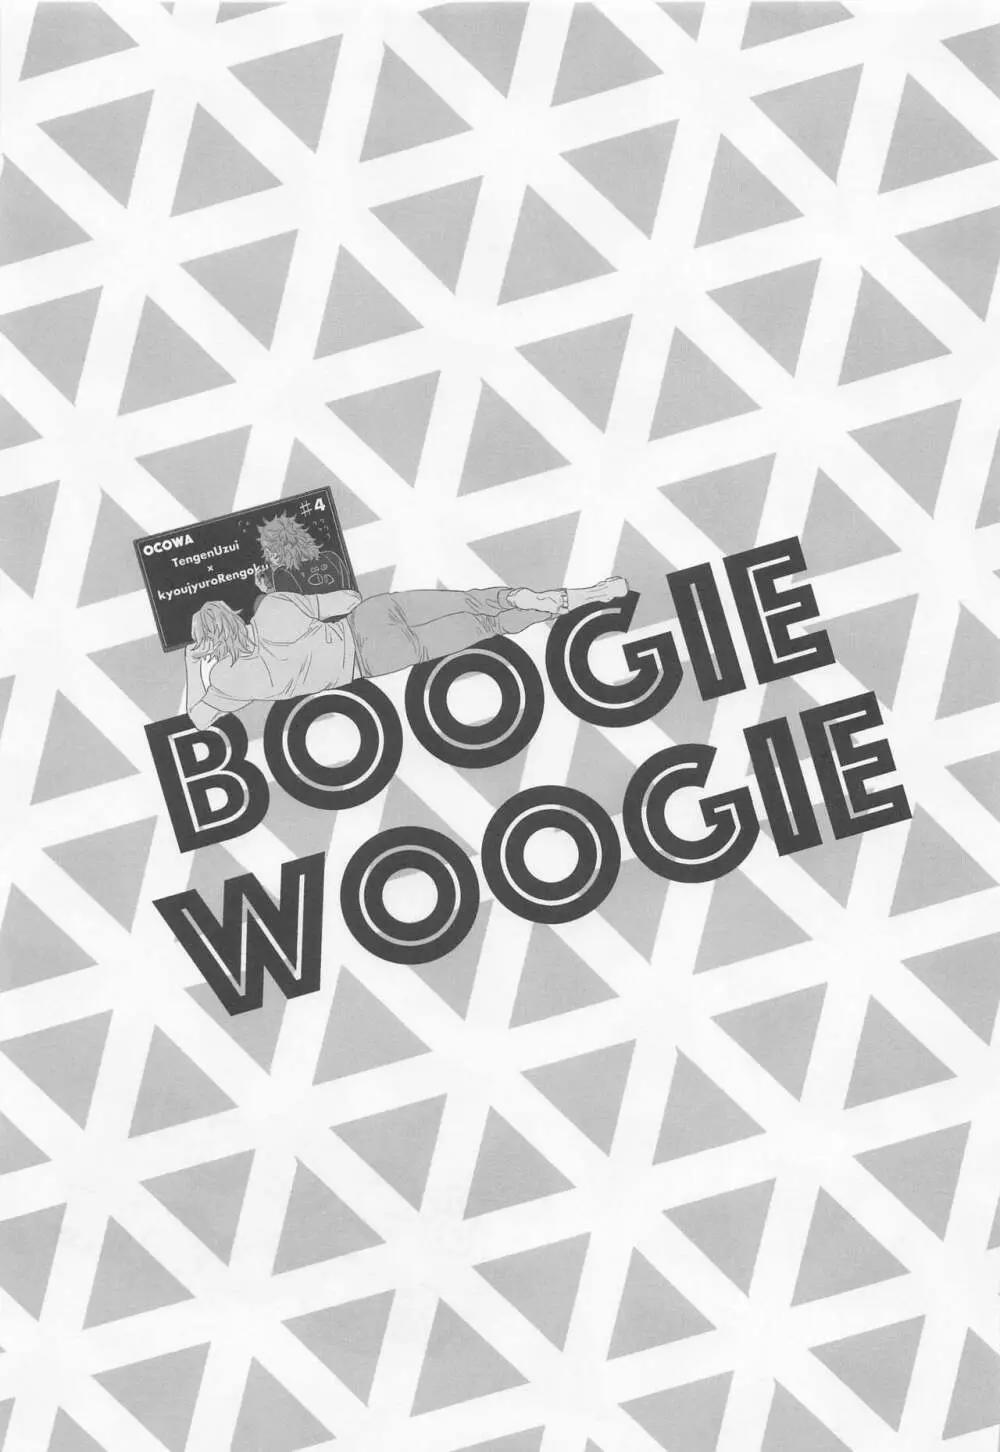 BOOGIE WOOGIE - page2